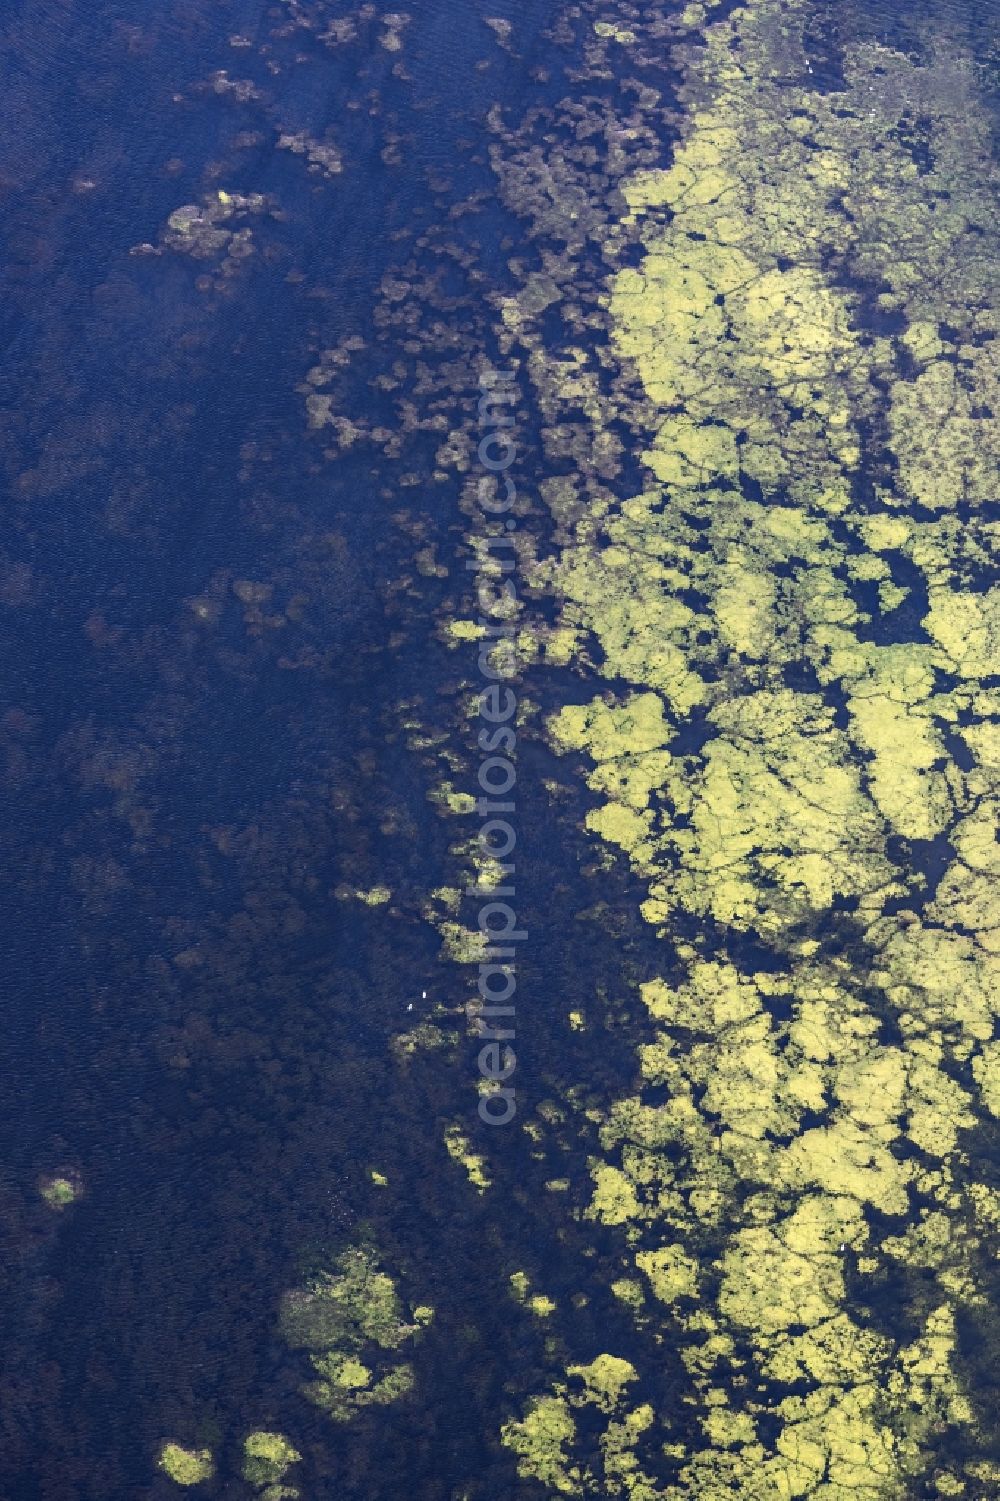 Wetter (Ruhr) from above - Green layer of algae on the water surface on Harkortsee of Ruhr in Wetter (Ruhr) in the state North Rhine-Westphalia, Germany